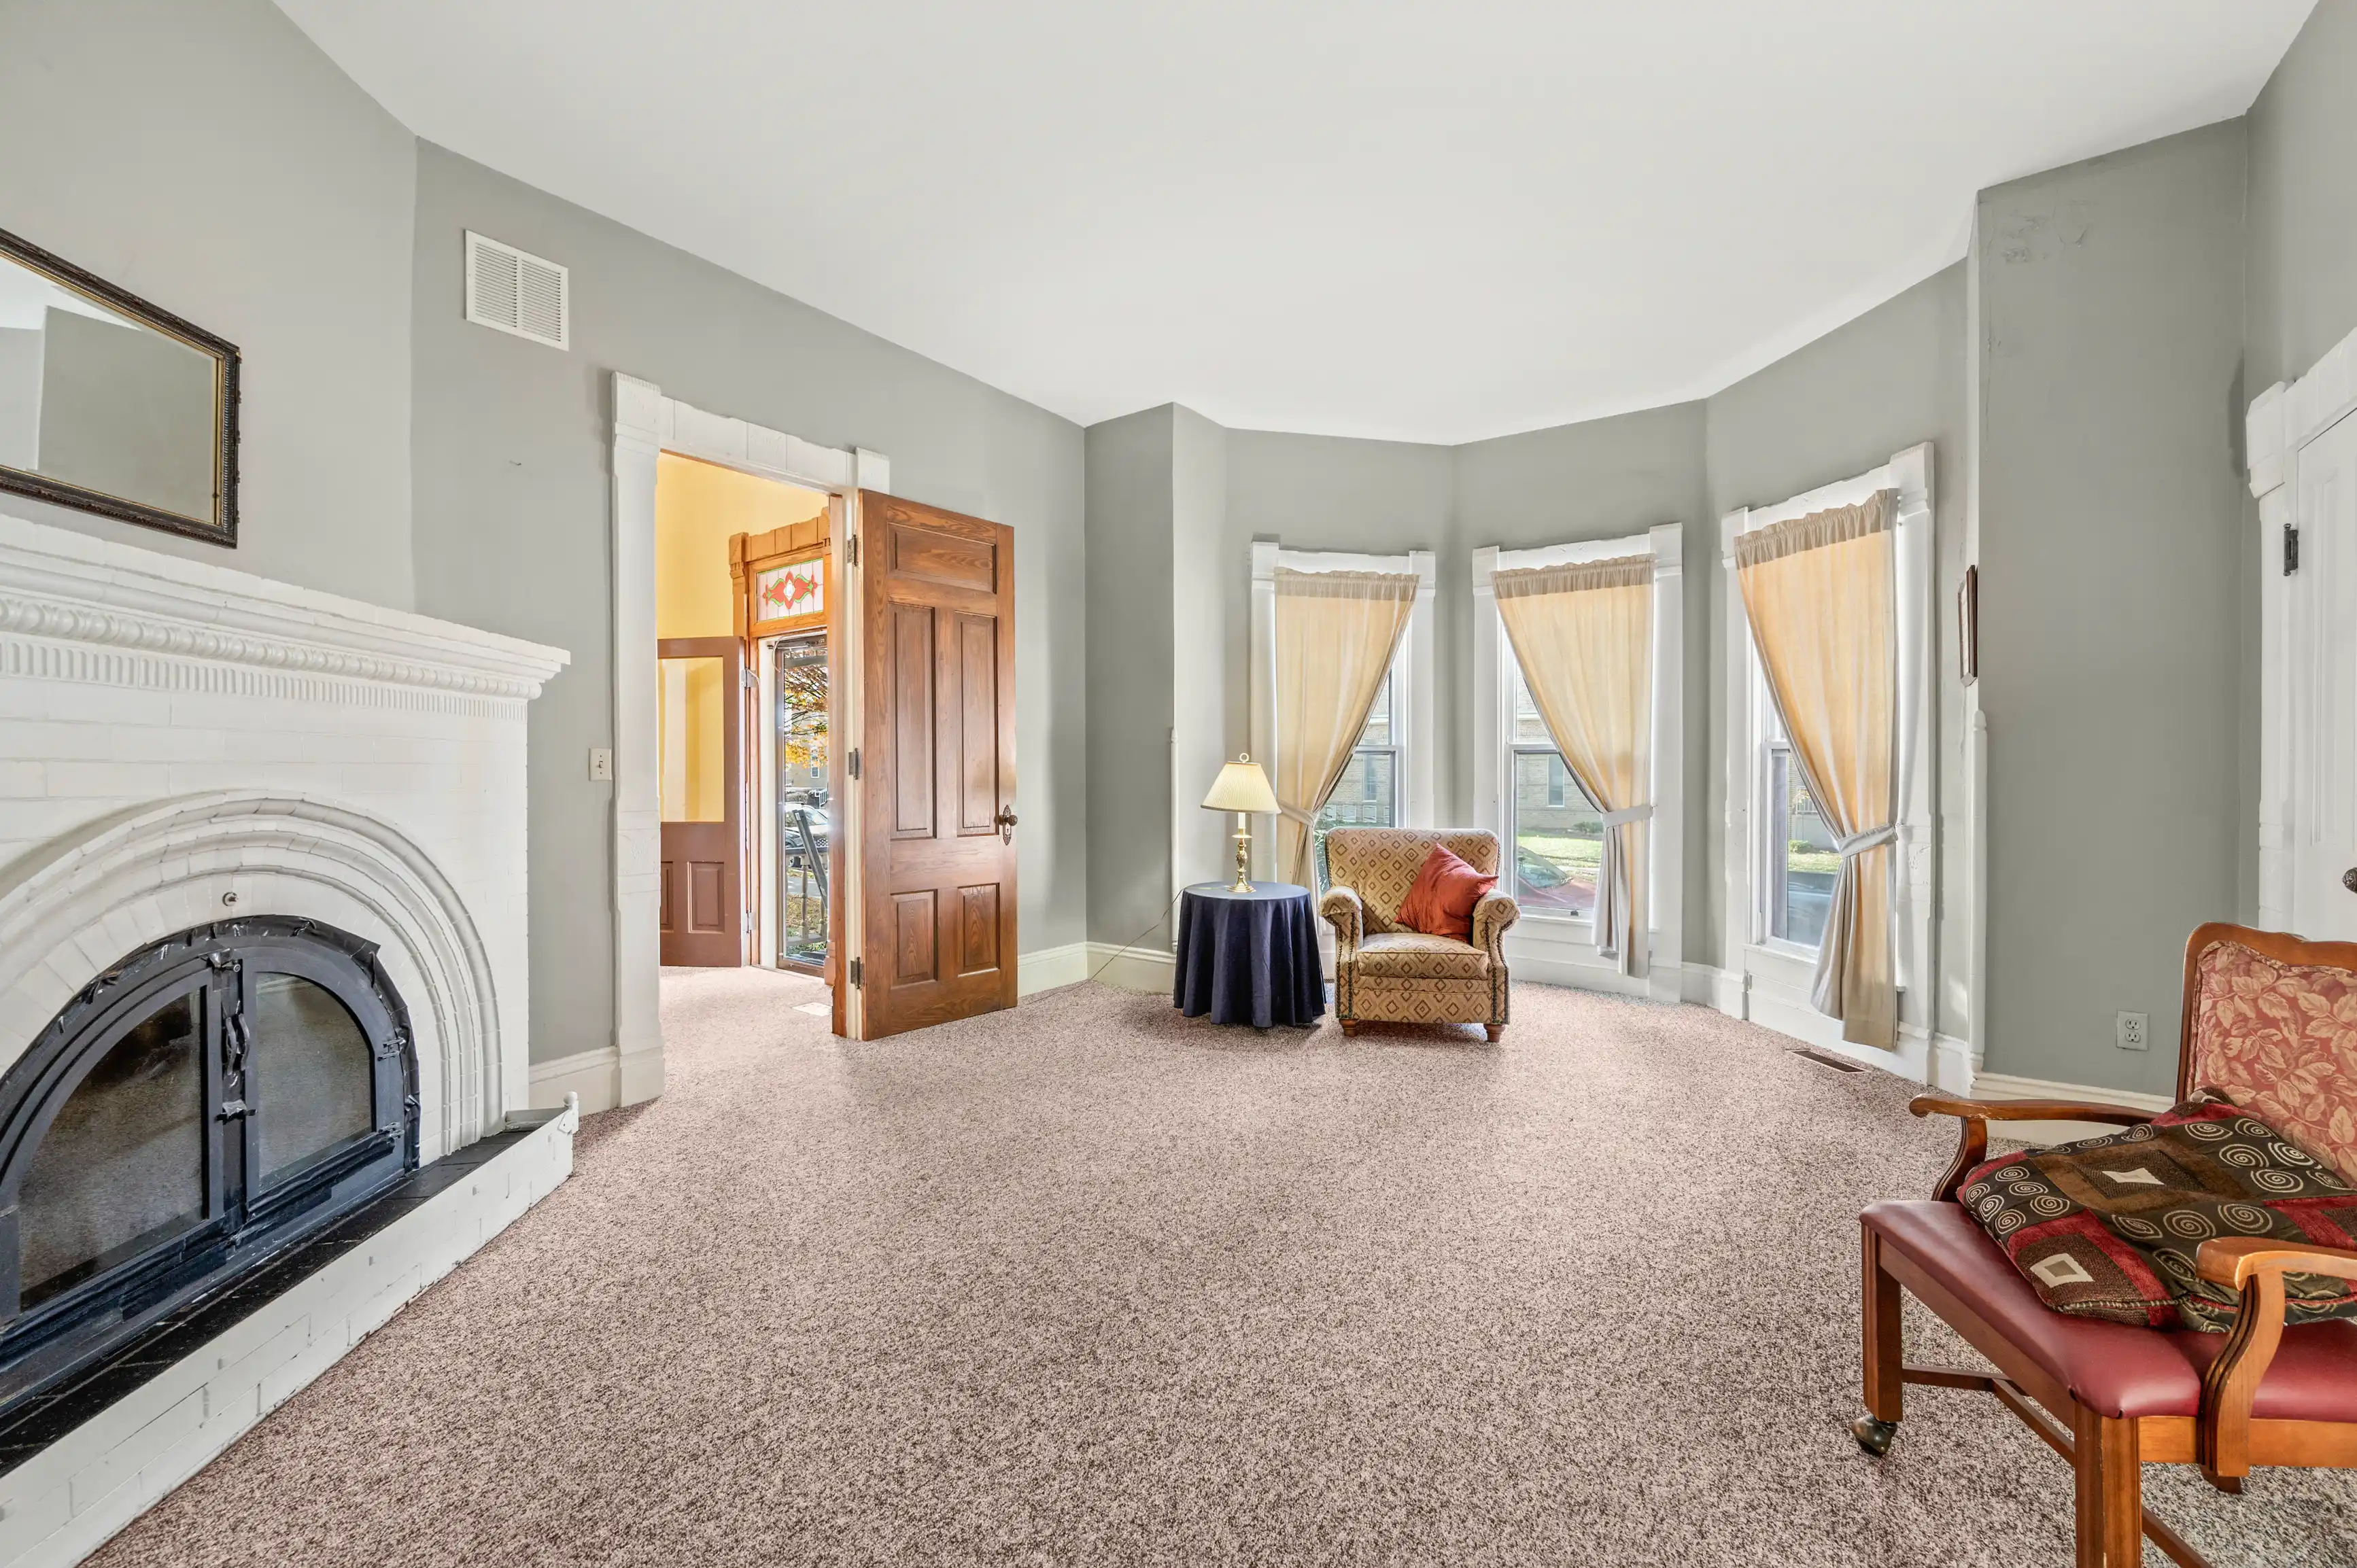 Spacious living room with plush carpet, a white fireplace, bay windows with curtains, classic wooden furniture, and a view into a hallway with a stained glass door.